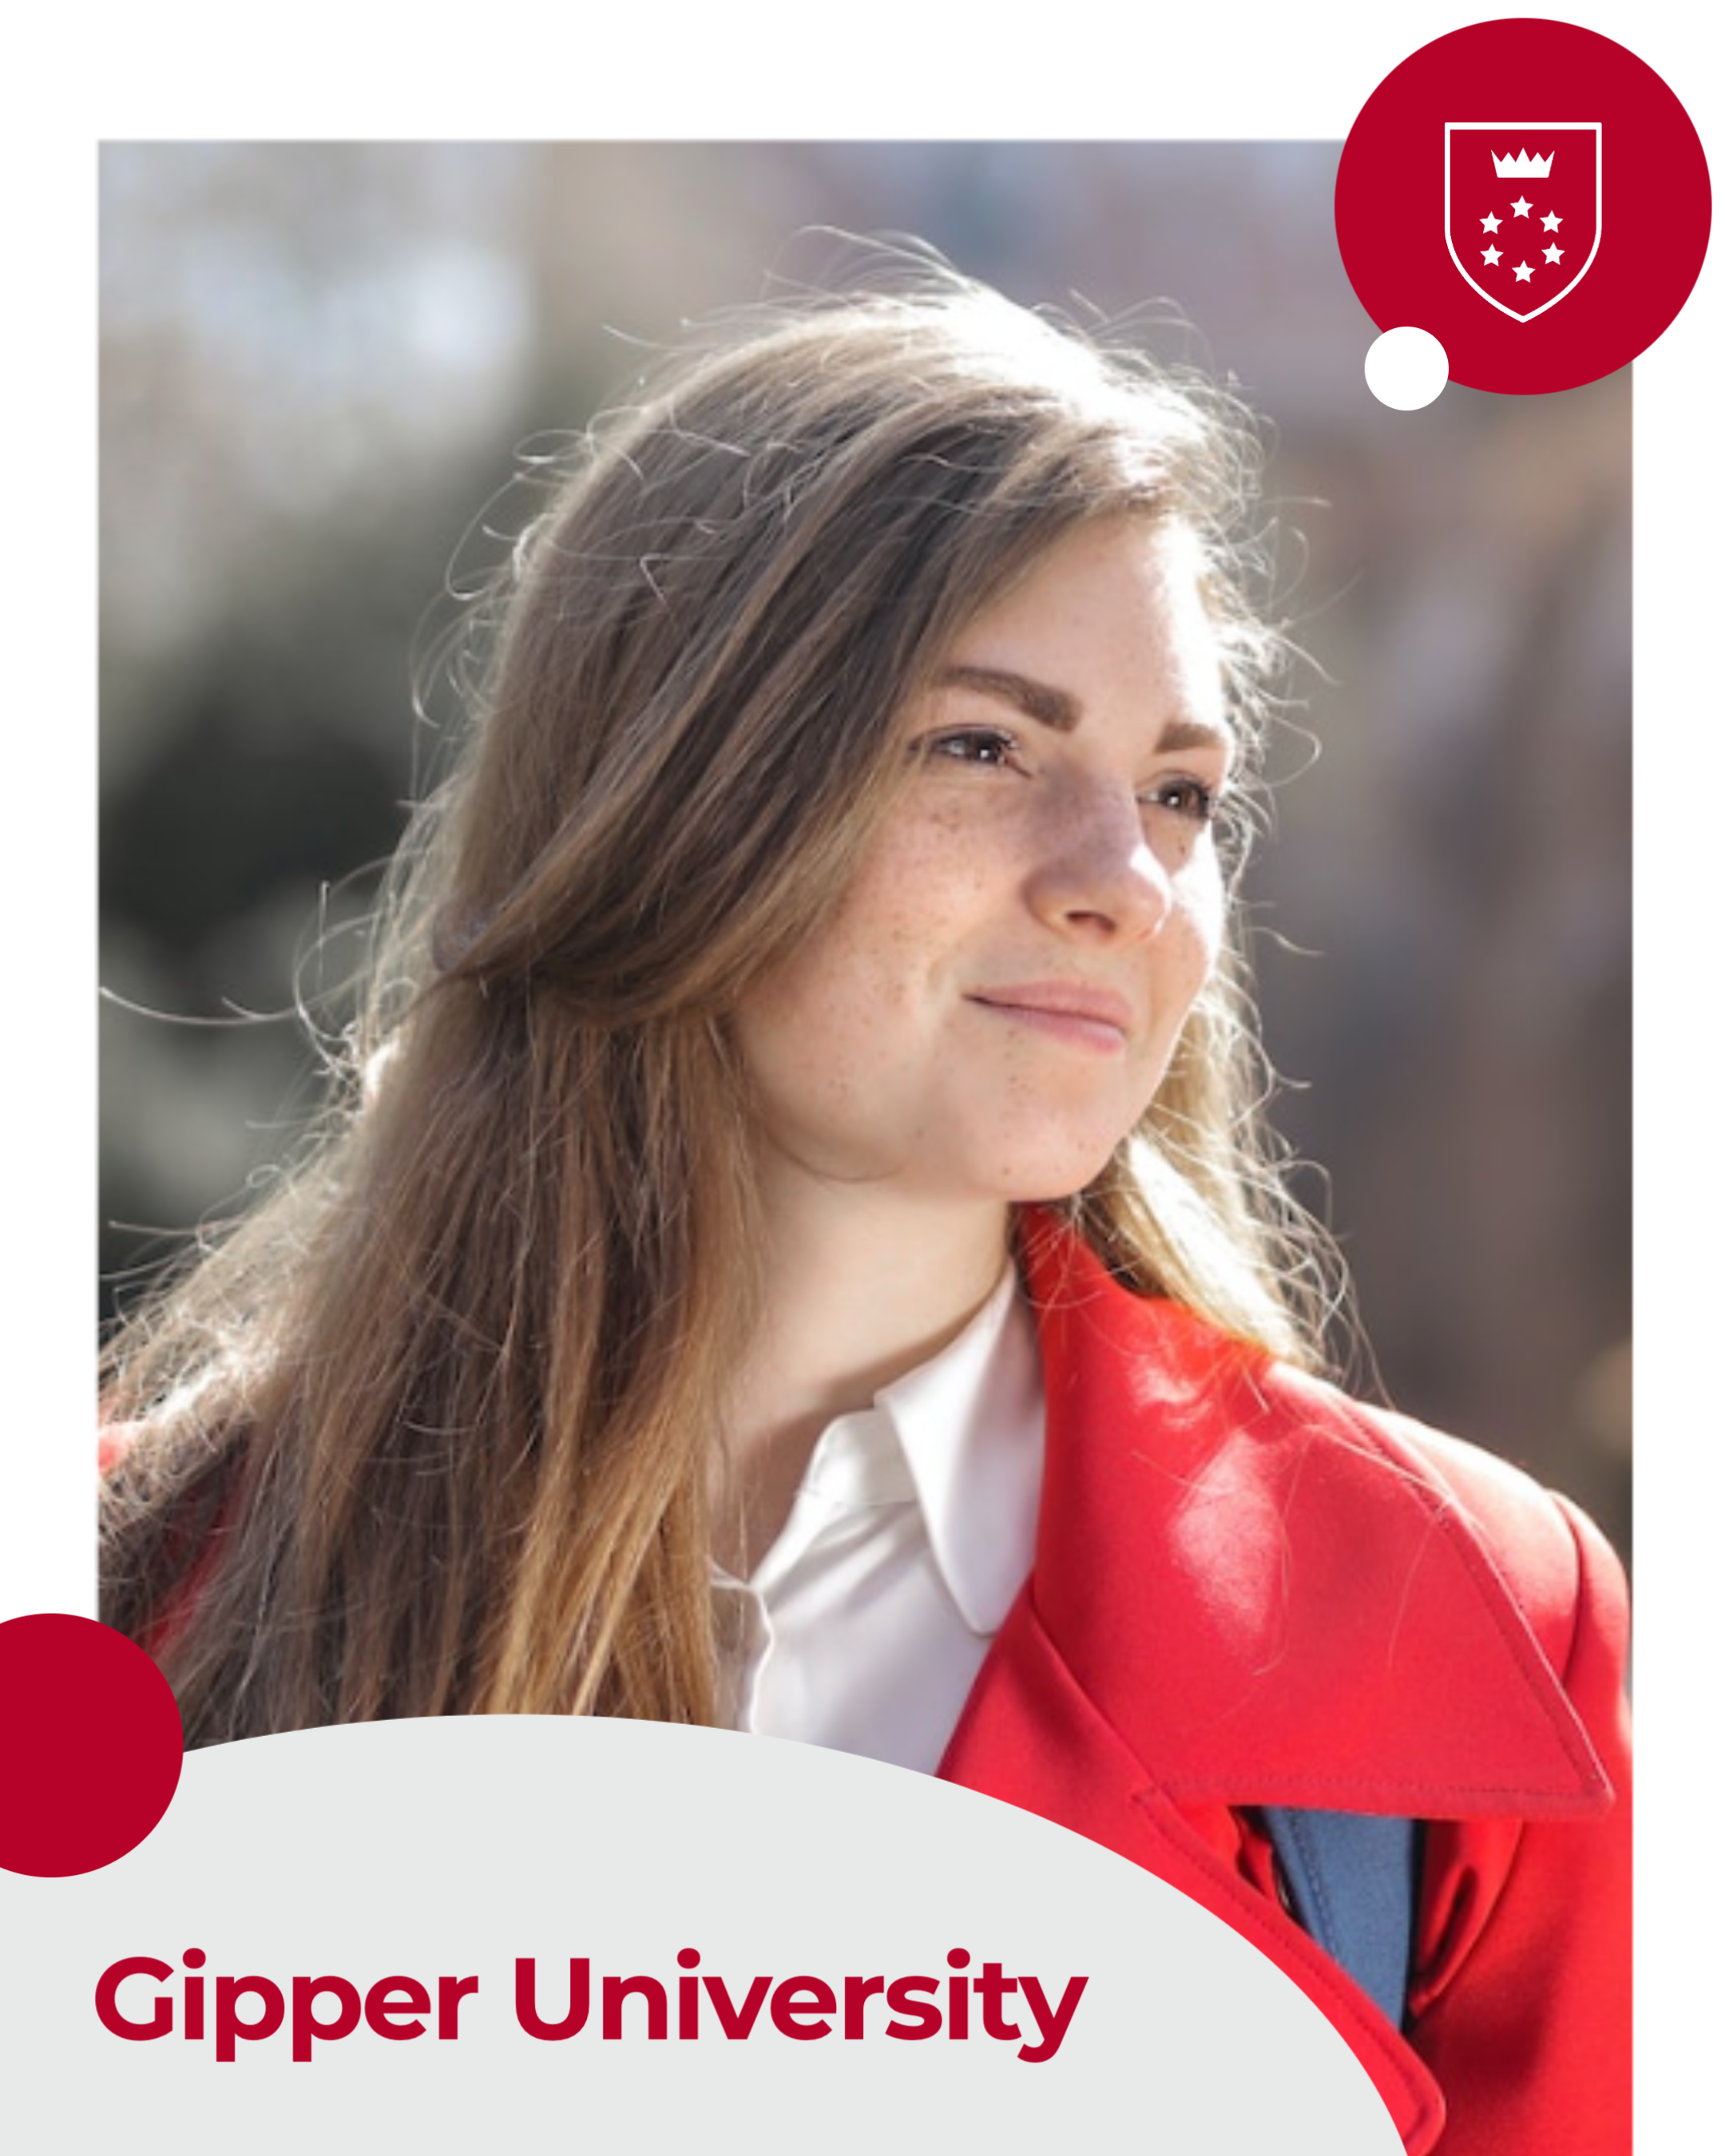 Gipper branded media template featuring young female student in a red jacket with a white and red branded frame around the picture